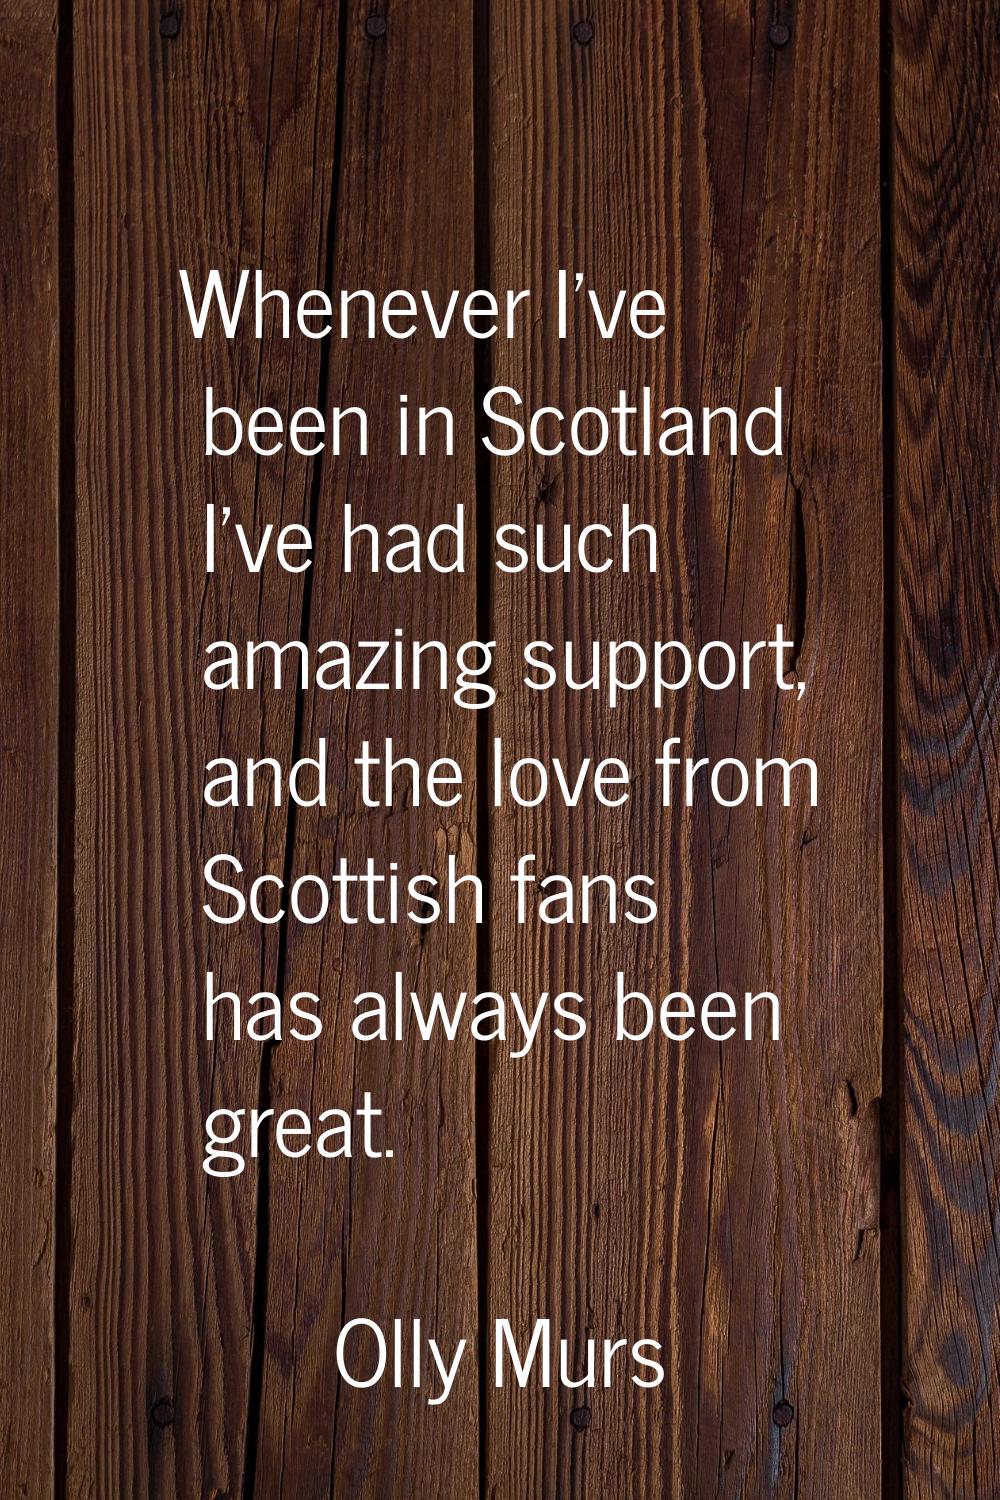 Whenever I've been in Scotland I've had such amazing support, and the love from Scottish fans has a